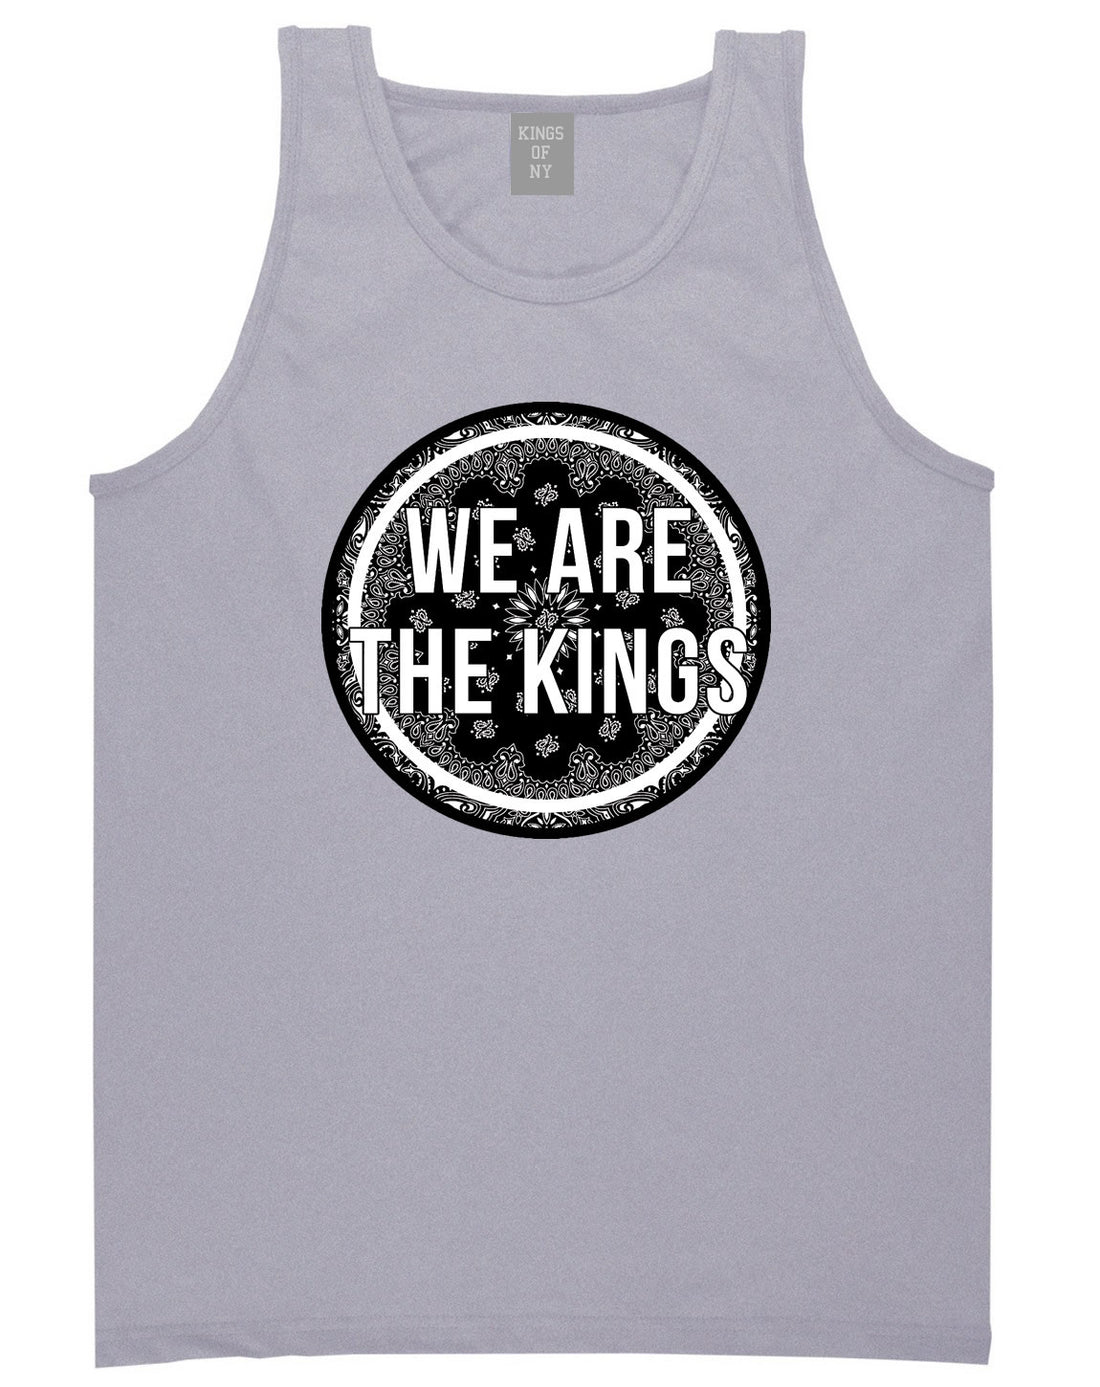 Kings Of NY We Are The Kings Tank Top in Grey